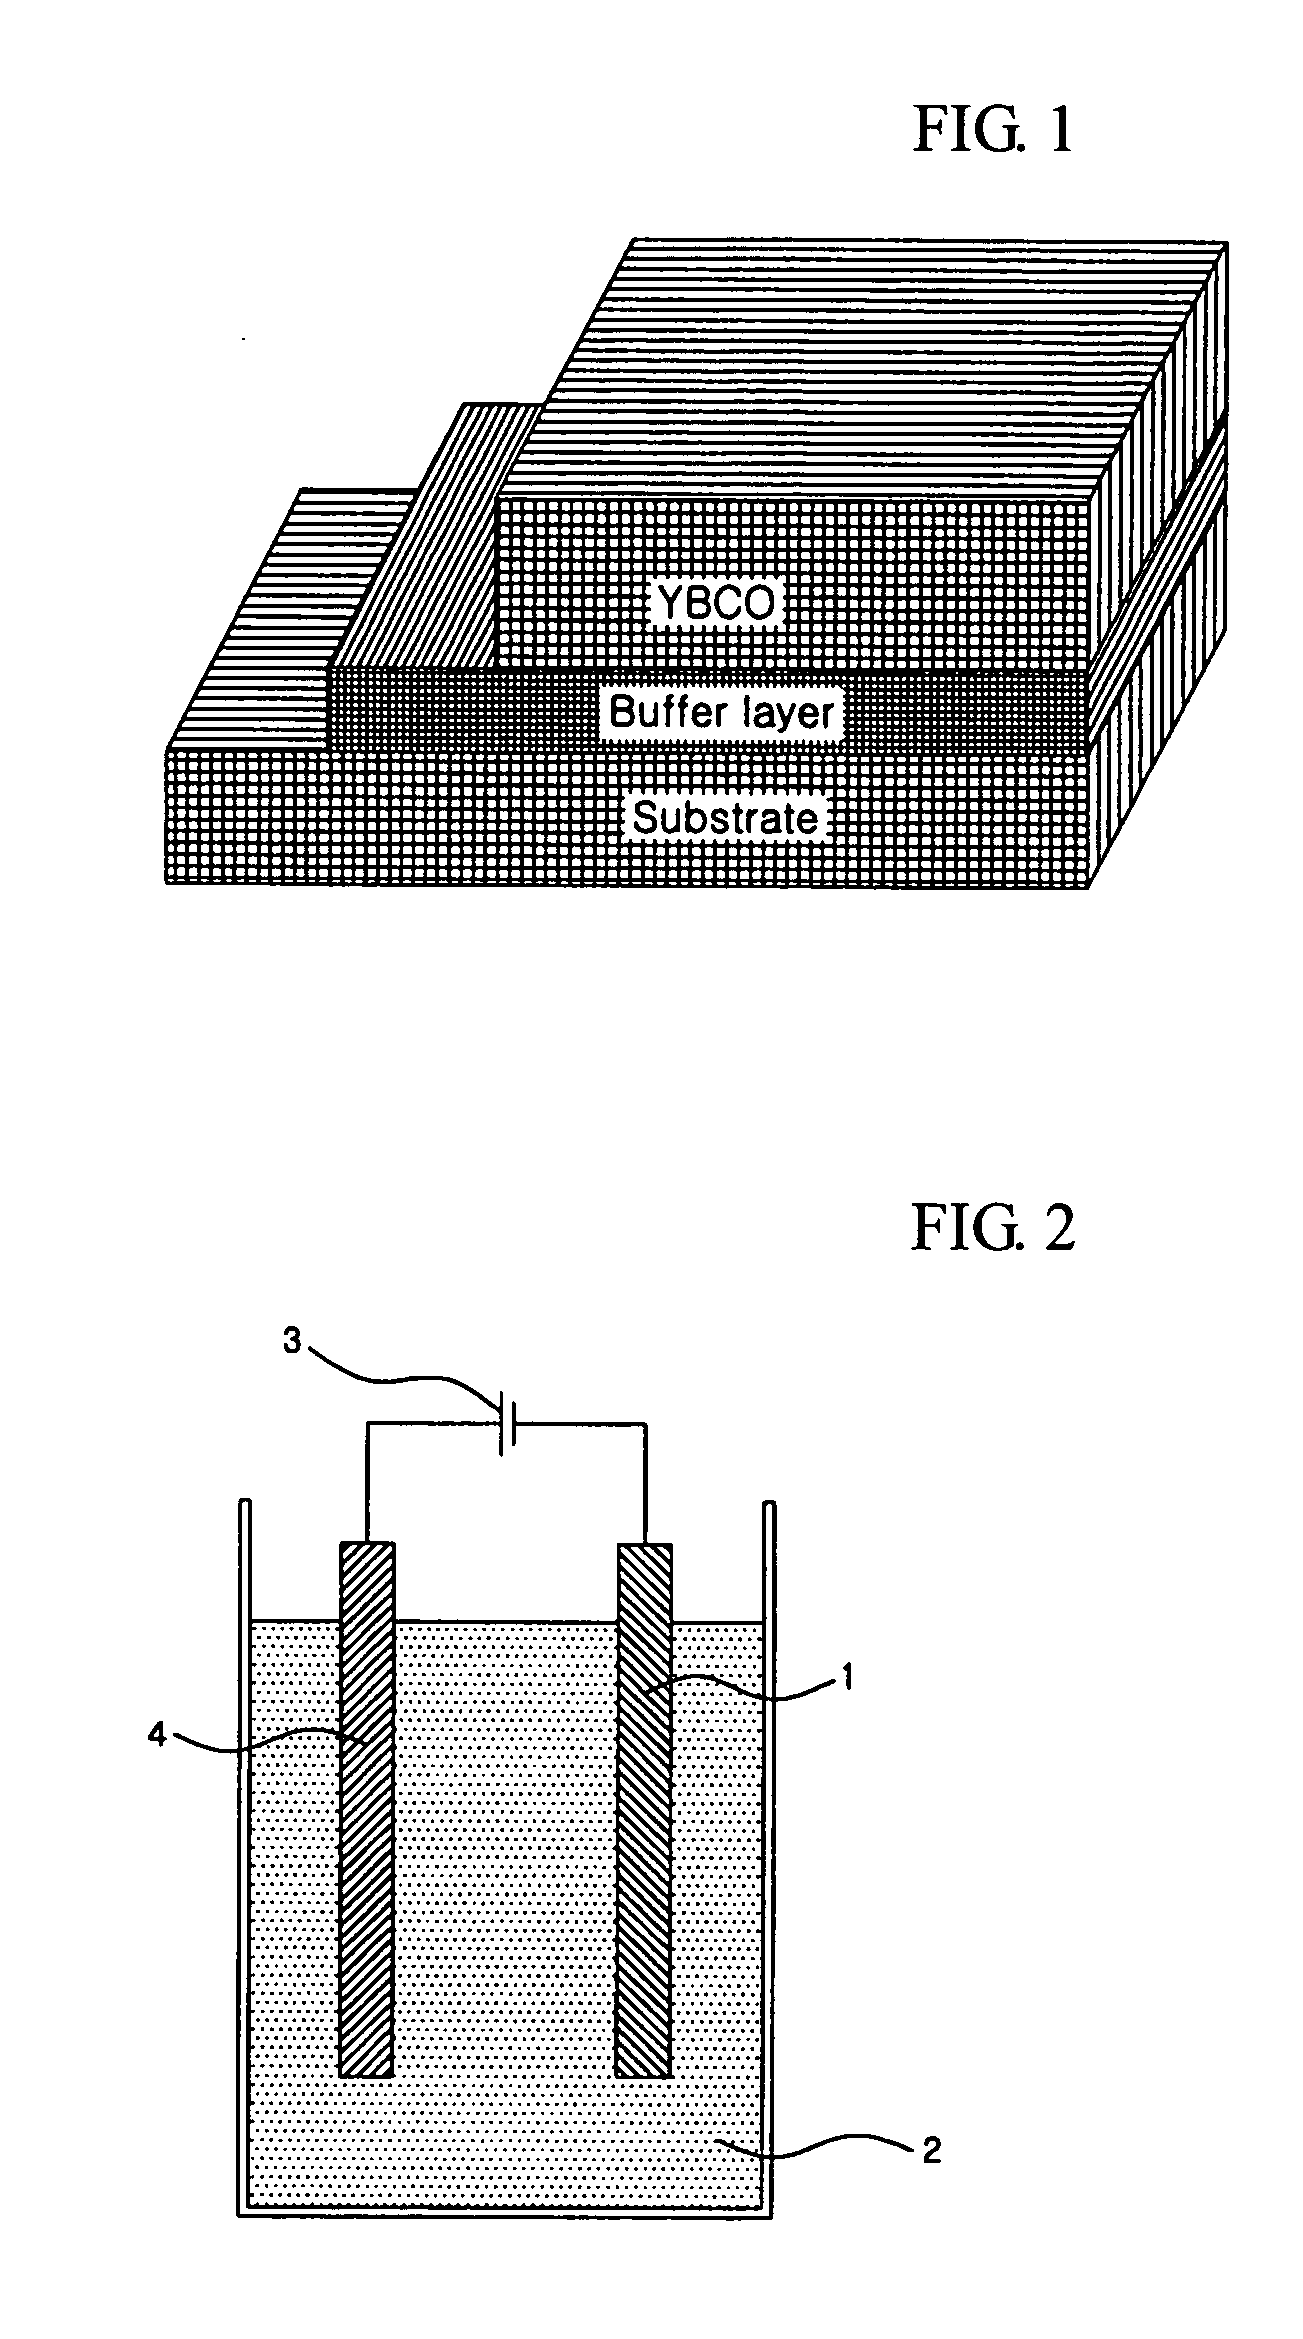 Low magnetic loss metal tape with biaxial texture and manufacturing method thereof